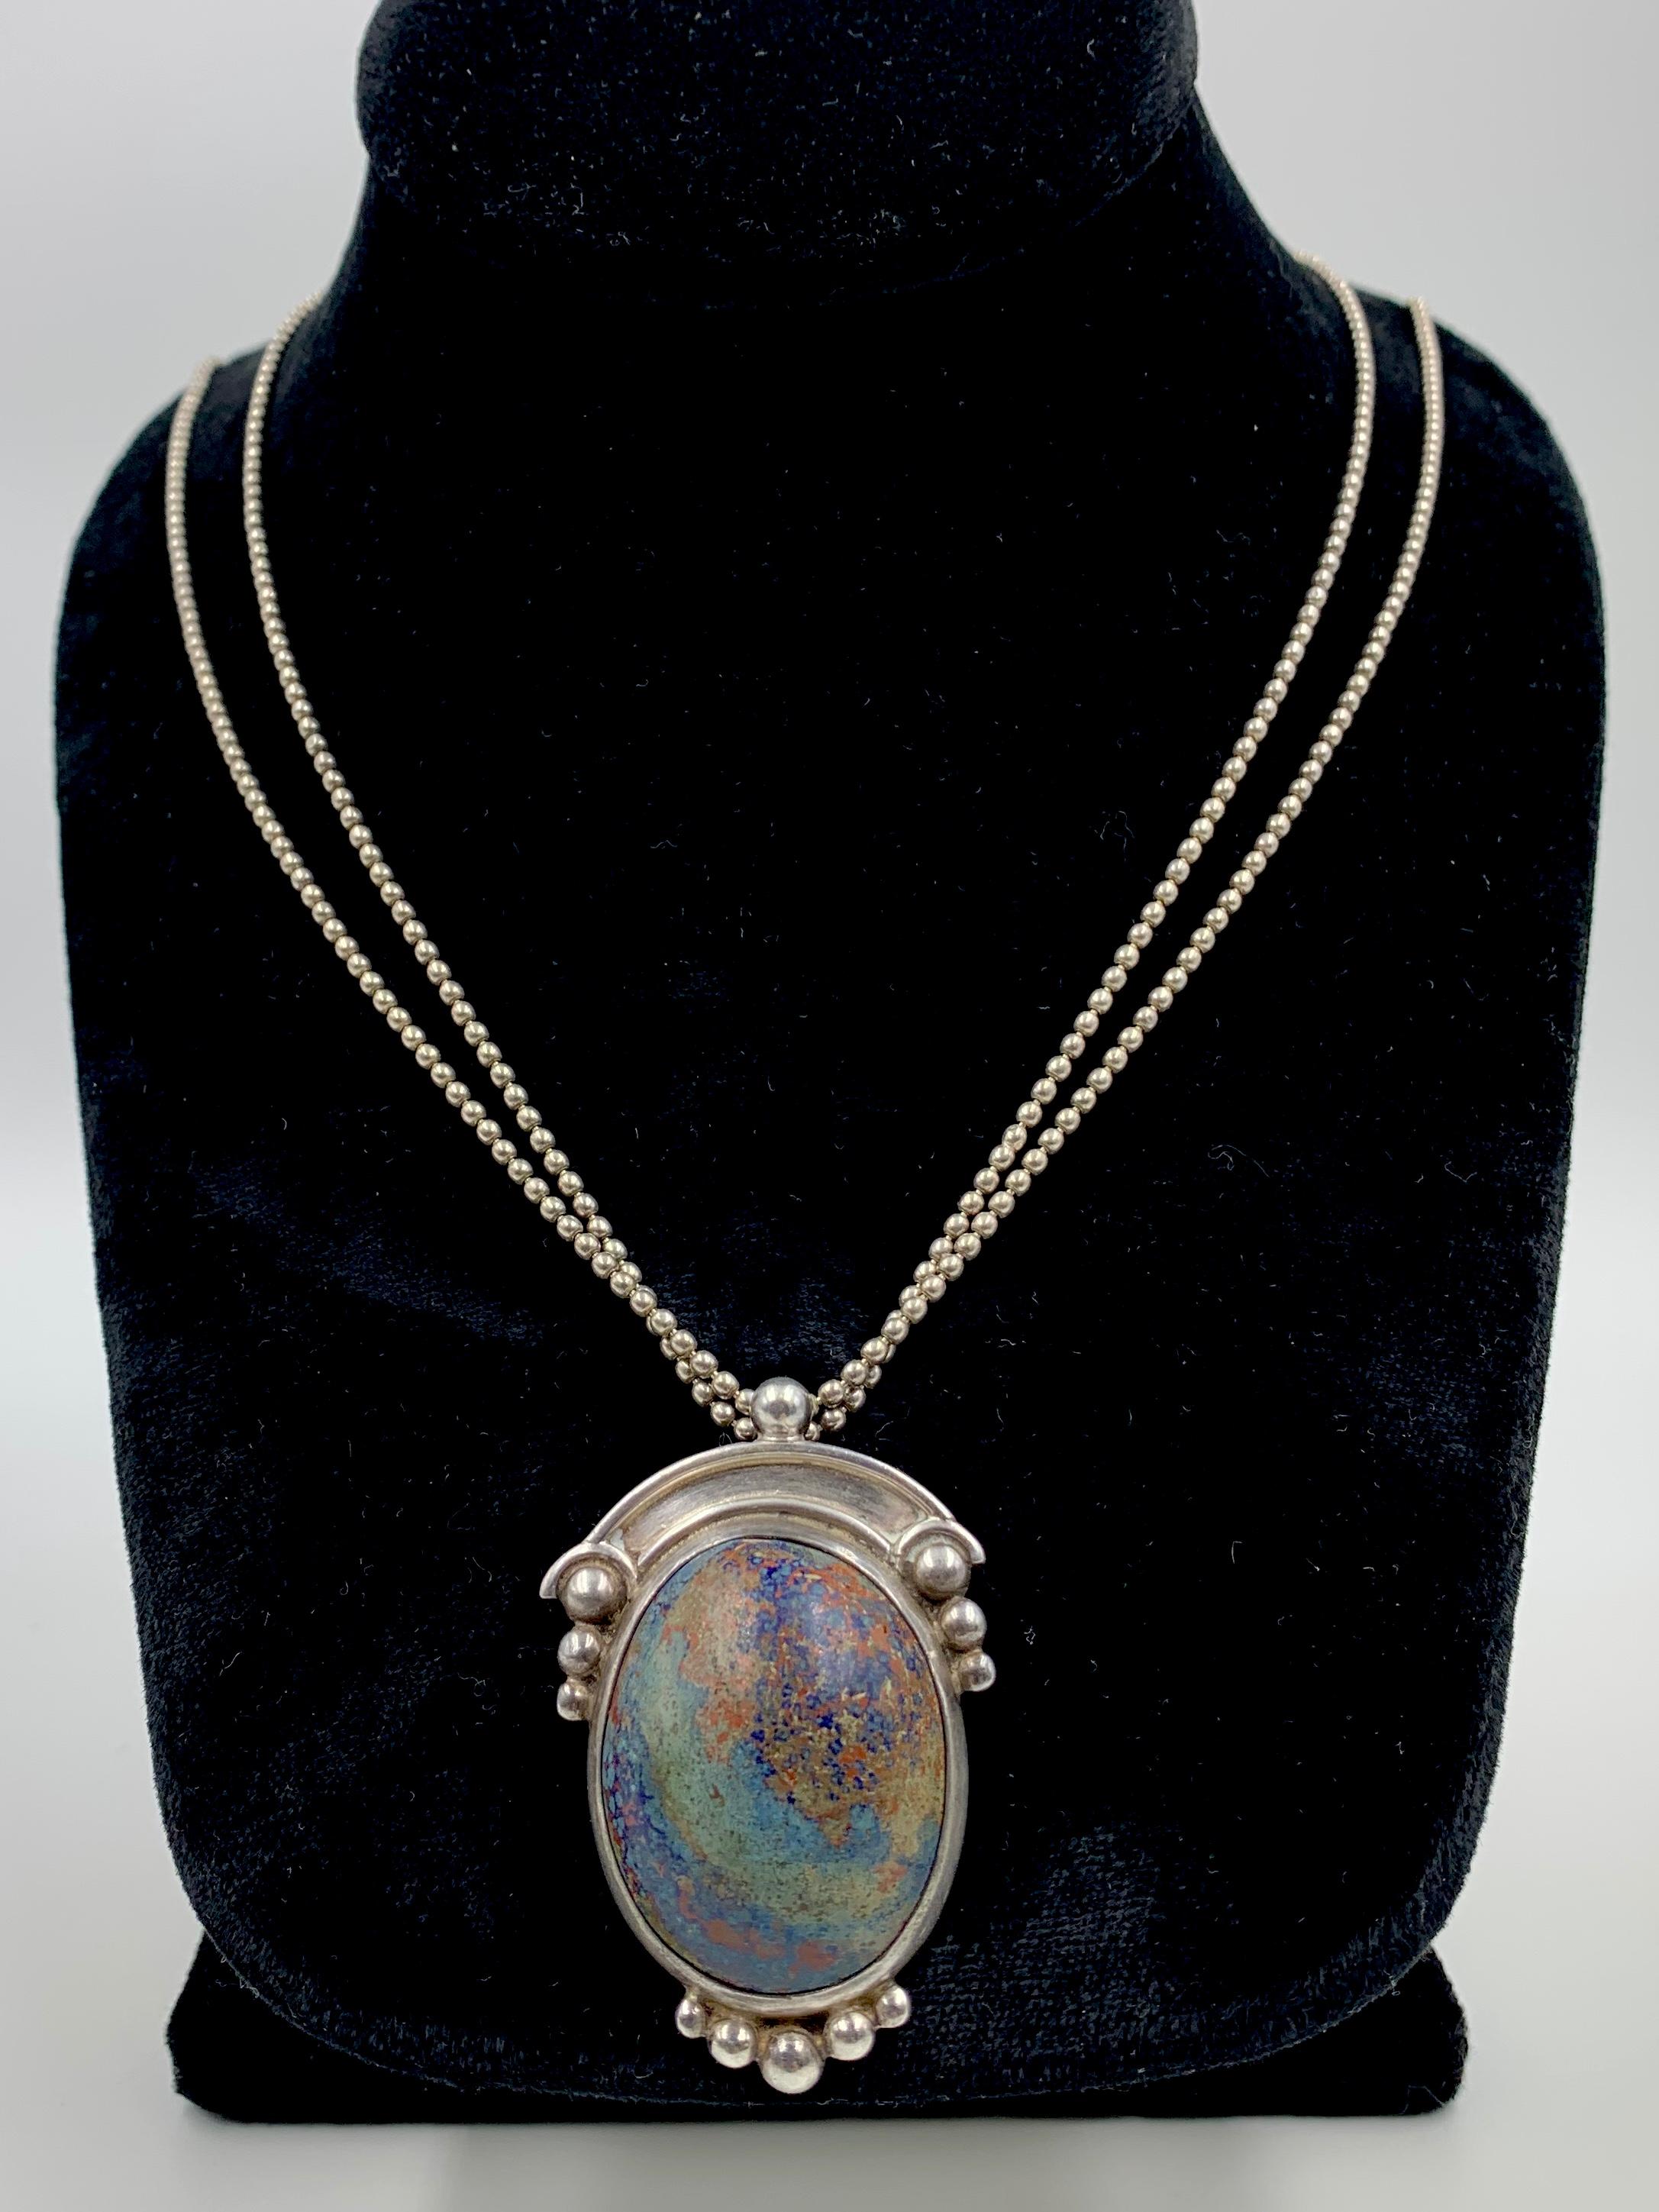 This beautiful rare necklace features a most spectacular crysocolla cabochon stone measuring 31mm by 25mm with superb inclusions forming an image one might see looking at the earth's surface from space. The stone's name is derived from the Greek